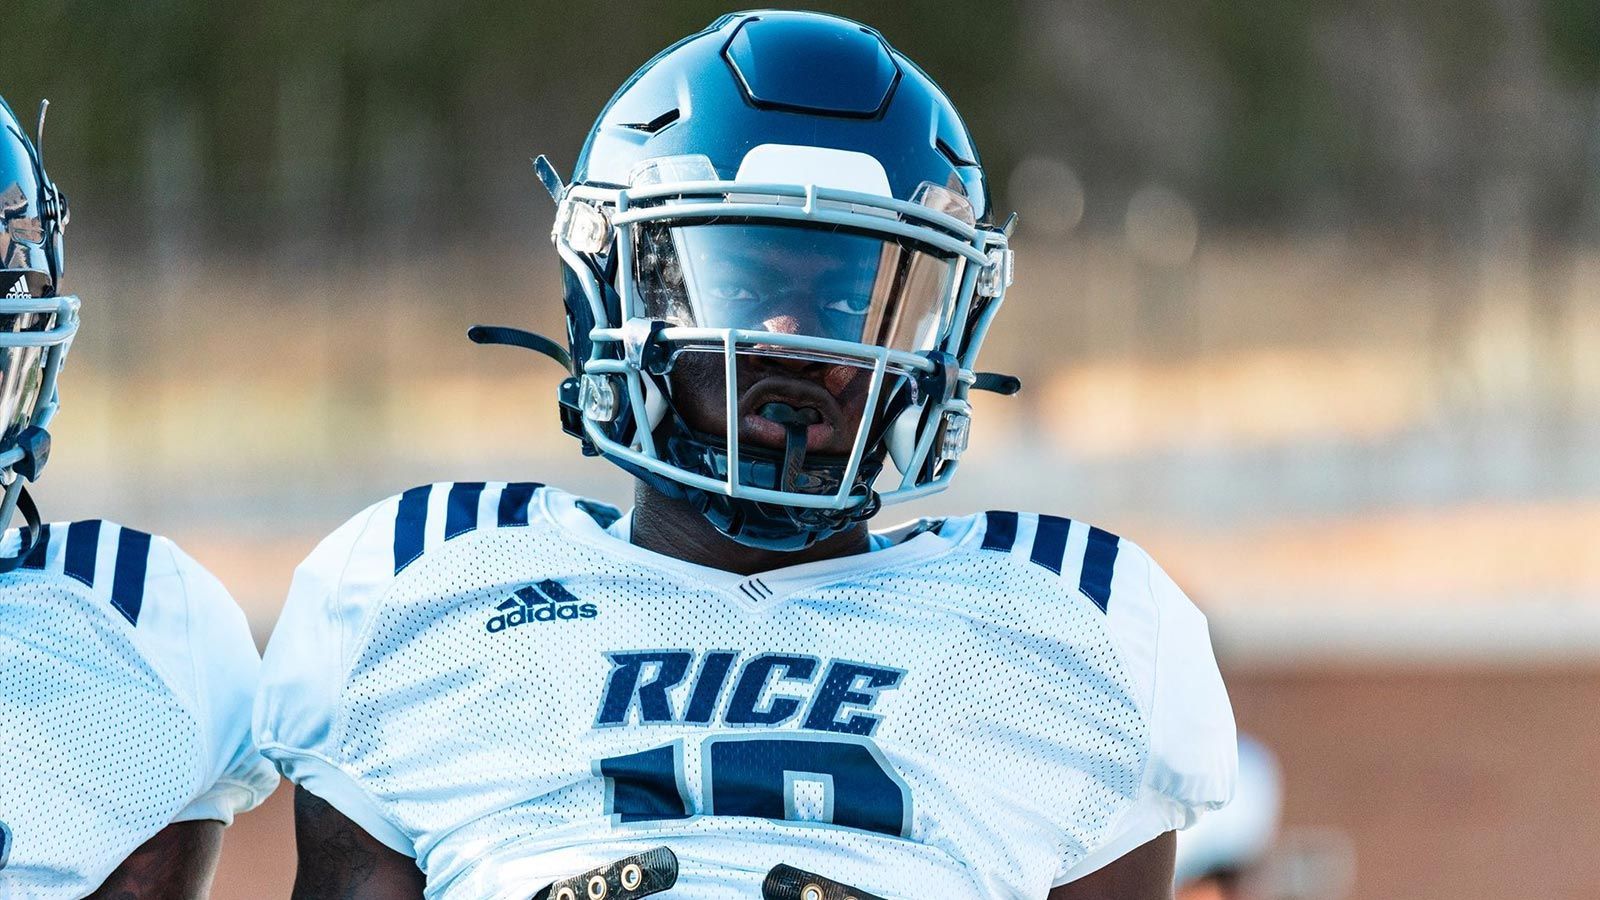 <strong>Moh Bility</strong><br>Position: Cornerback<br>College: Rice University Athletics